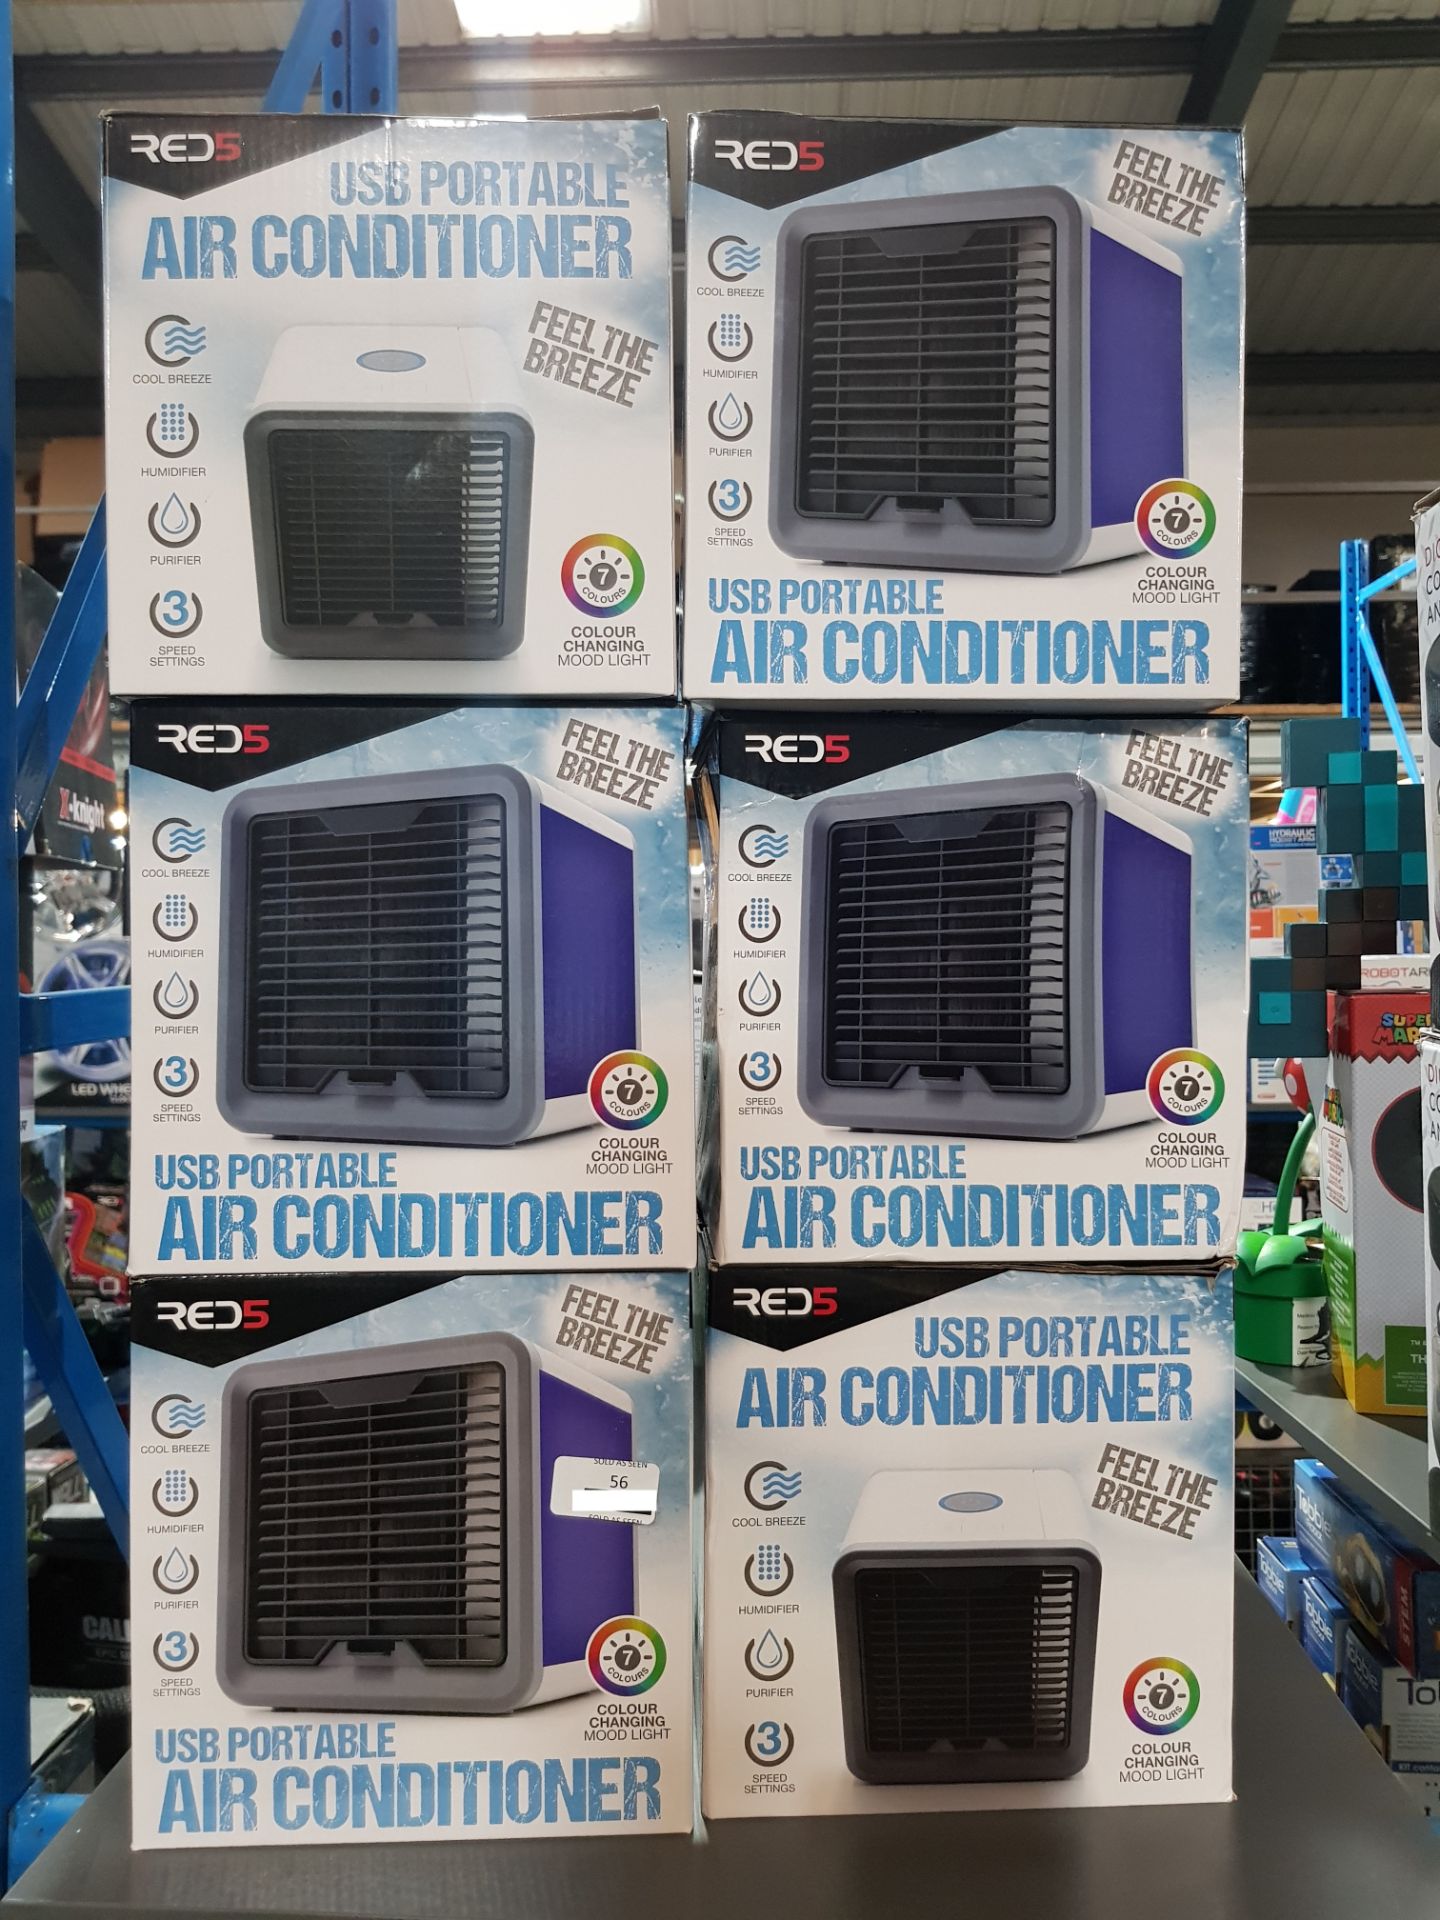 6 X Red5 USB Portable Air Conditioner